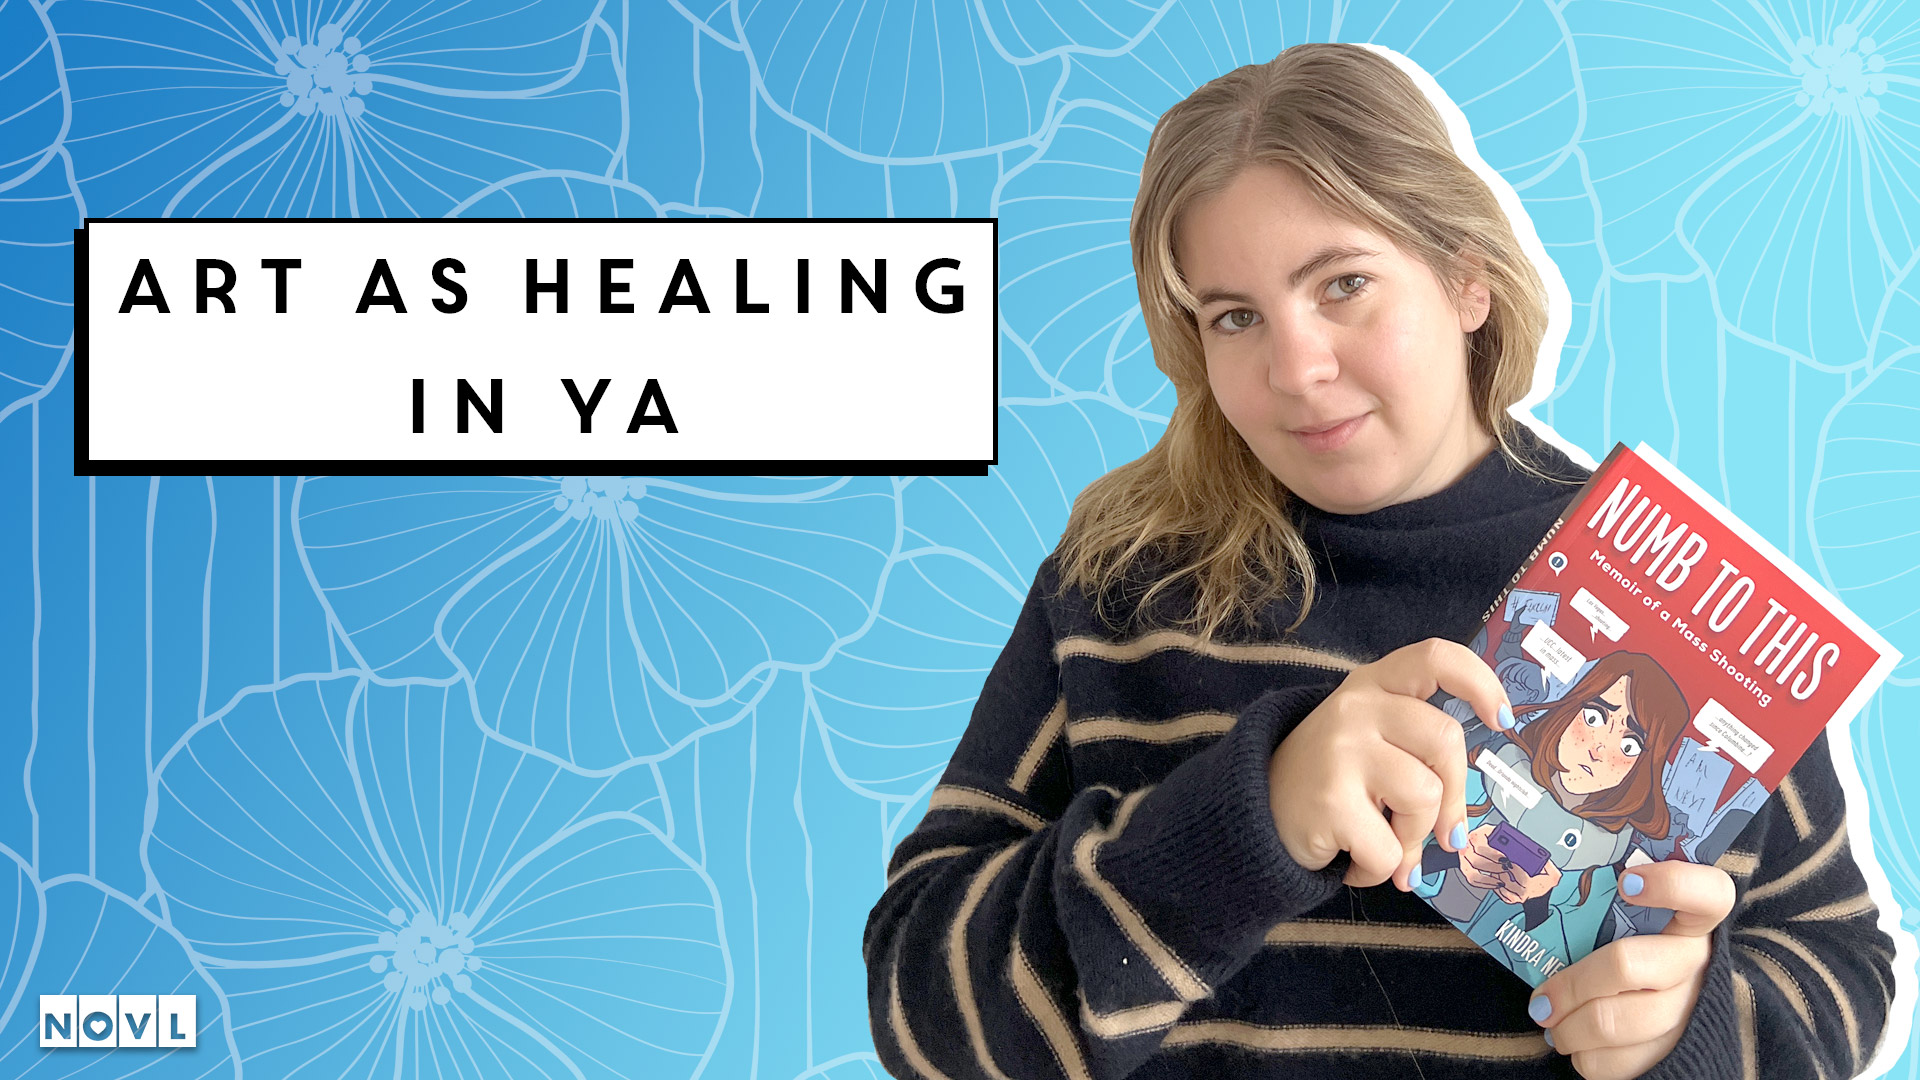 The NOVL Blog, Featured Image for Article: Art as Healing in YA